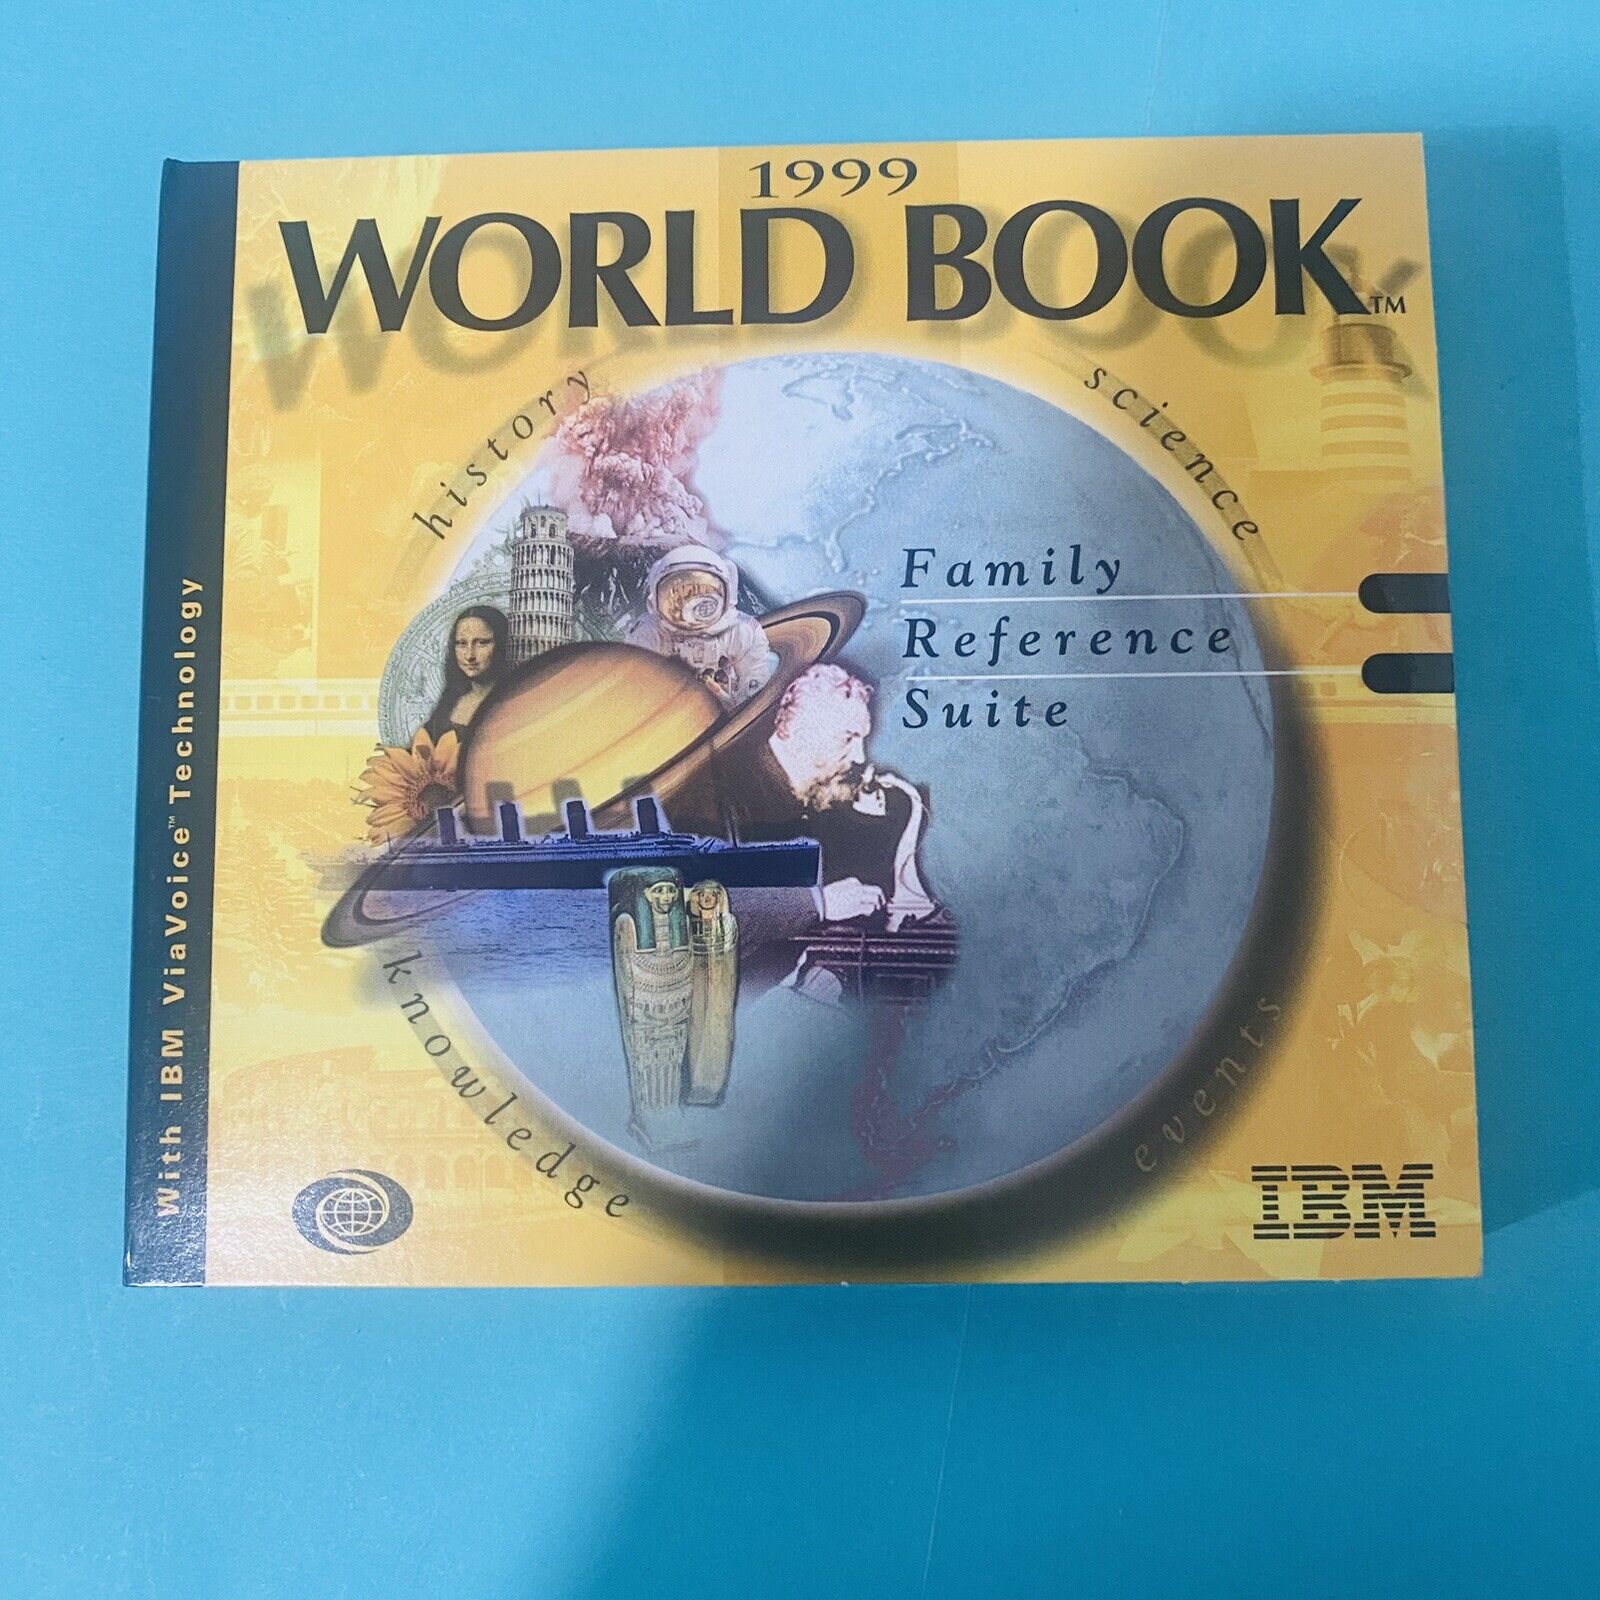 1999 World Book Family Reference Suite IBM CD History Science Knowledge 3 Discs